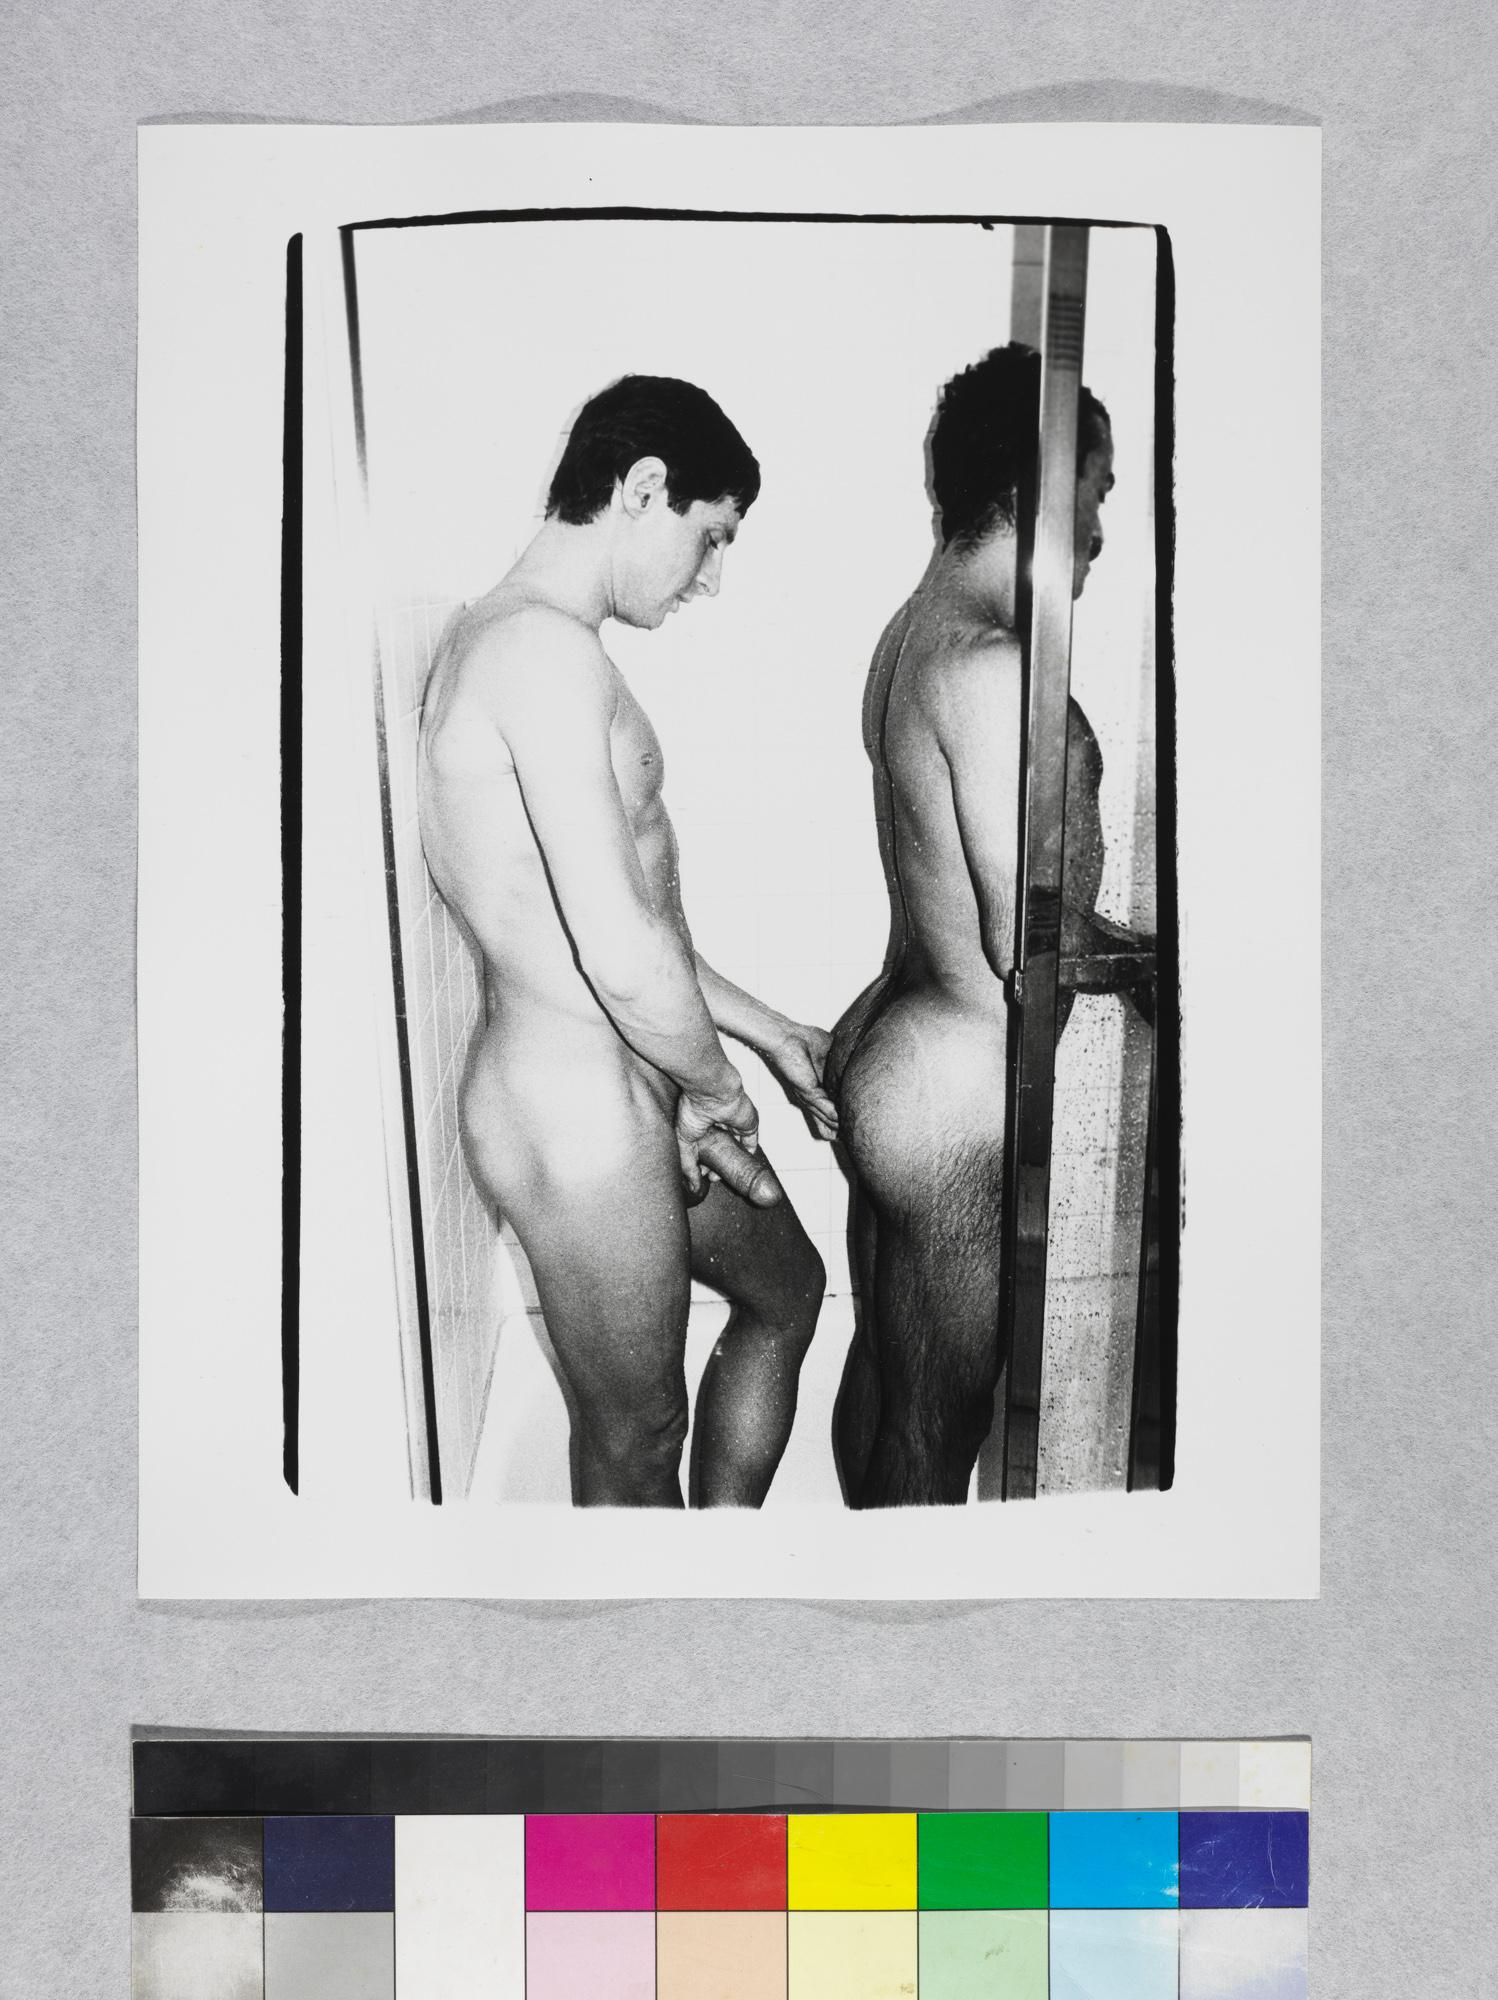 Gelatin silver print of Victor Hugo and Male Model in Shower - Pop Art Photograph by Andy Warhol